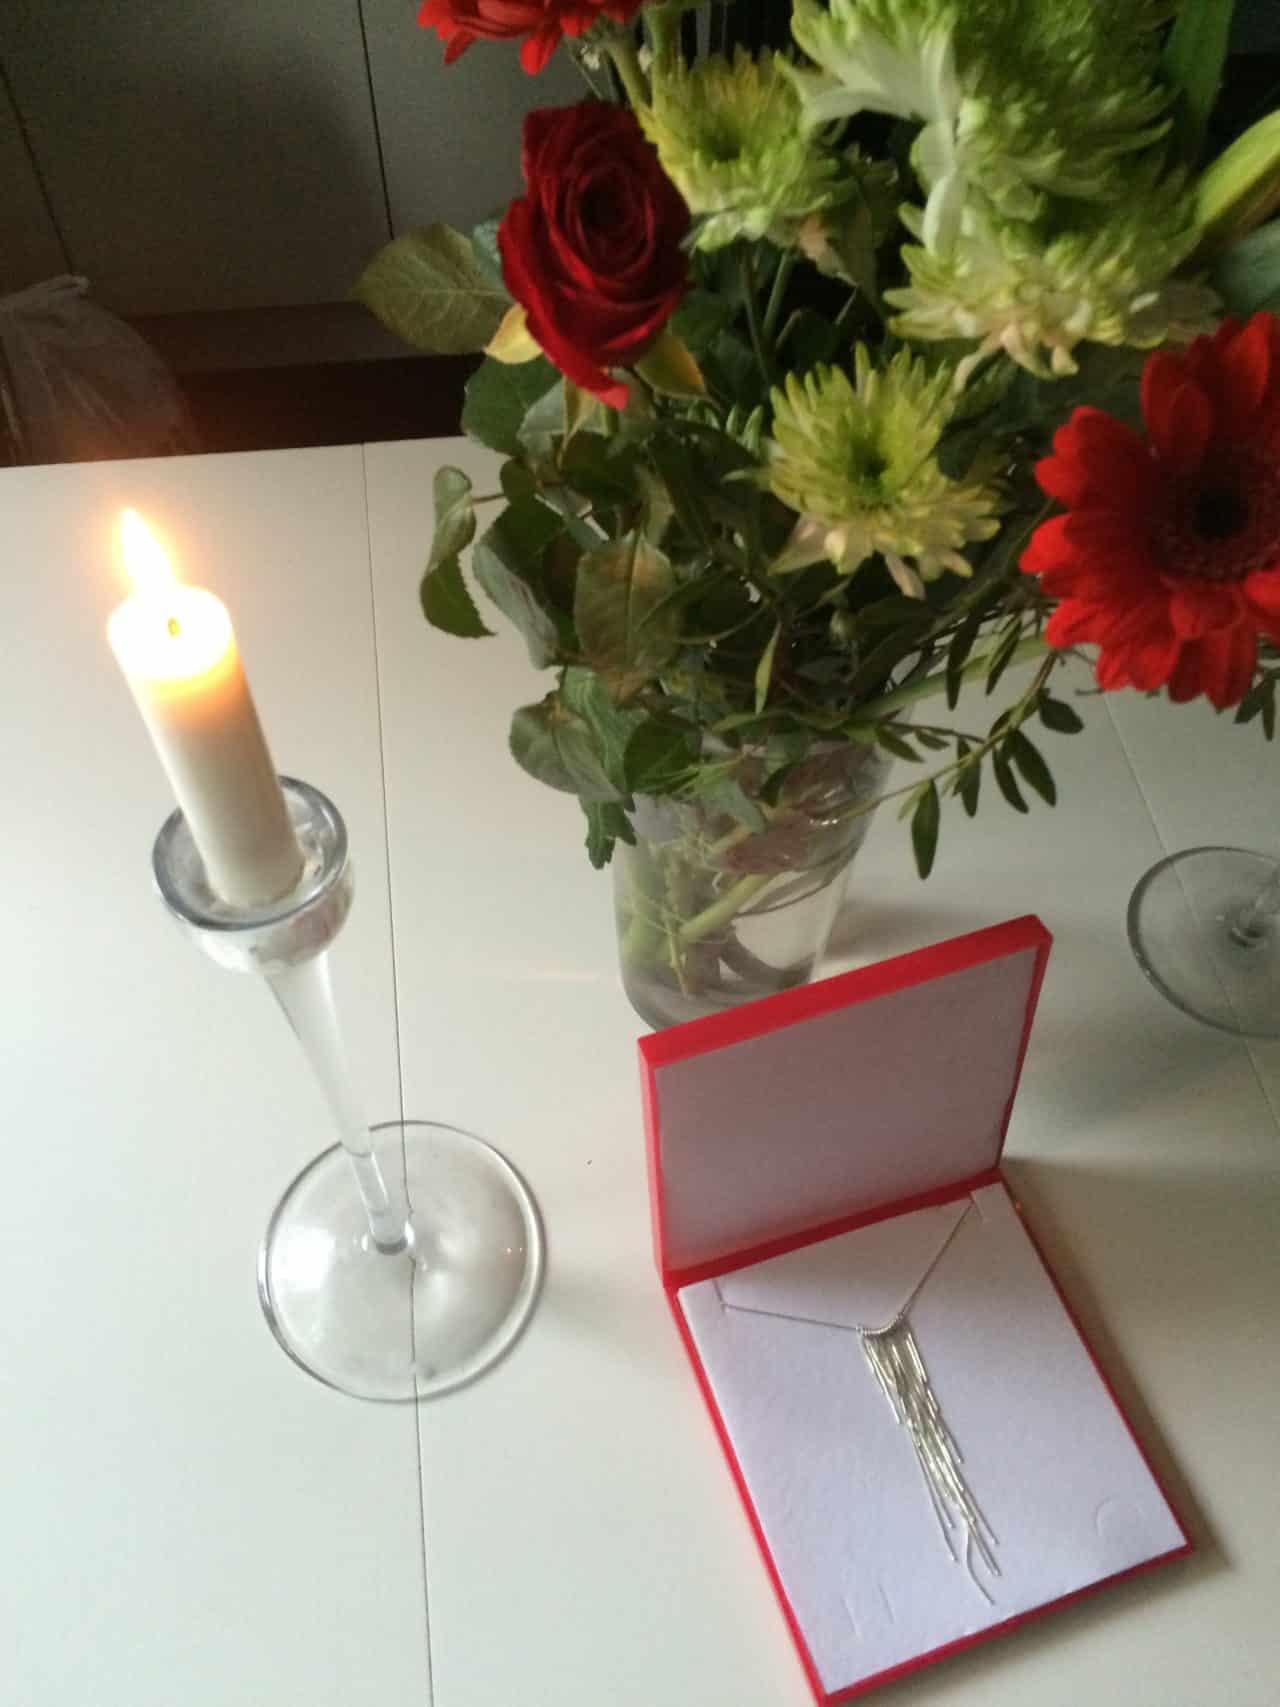 Silver Necklace In A Red Box On White Table With Flowers And Lighted Candle In Candlestick